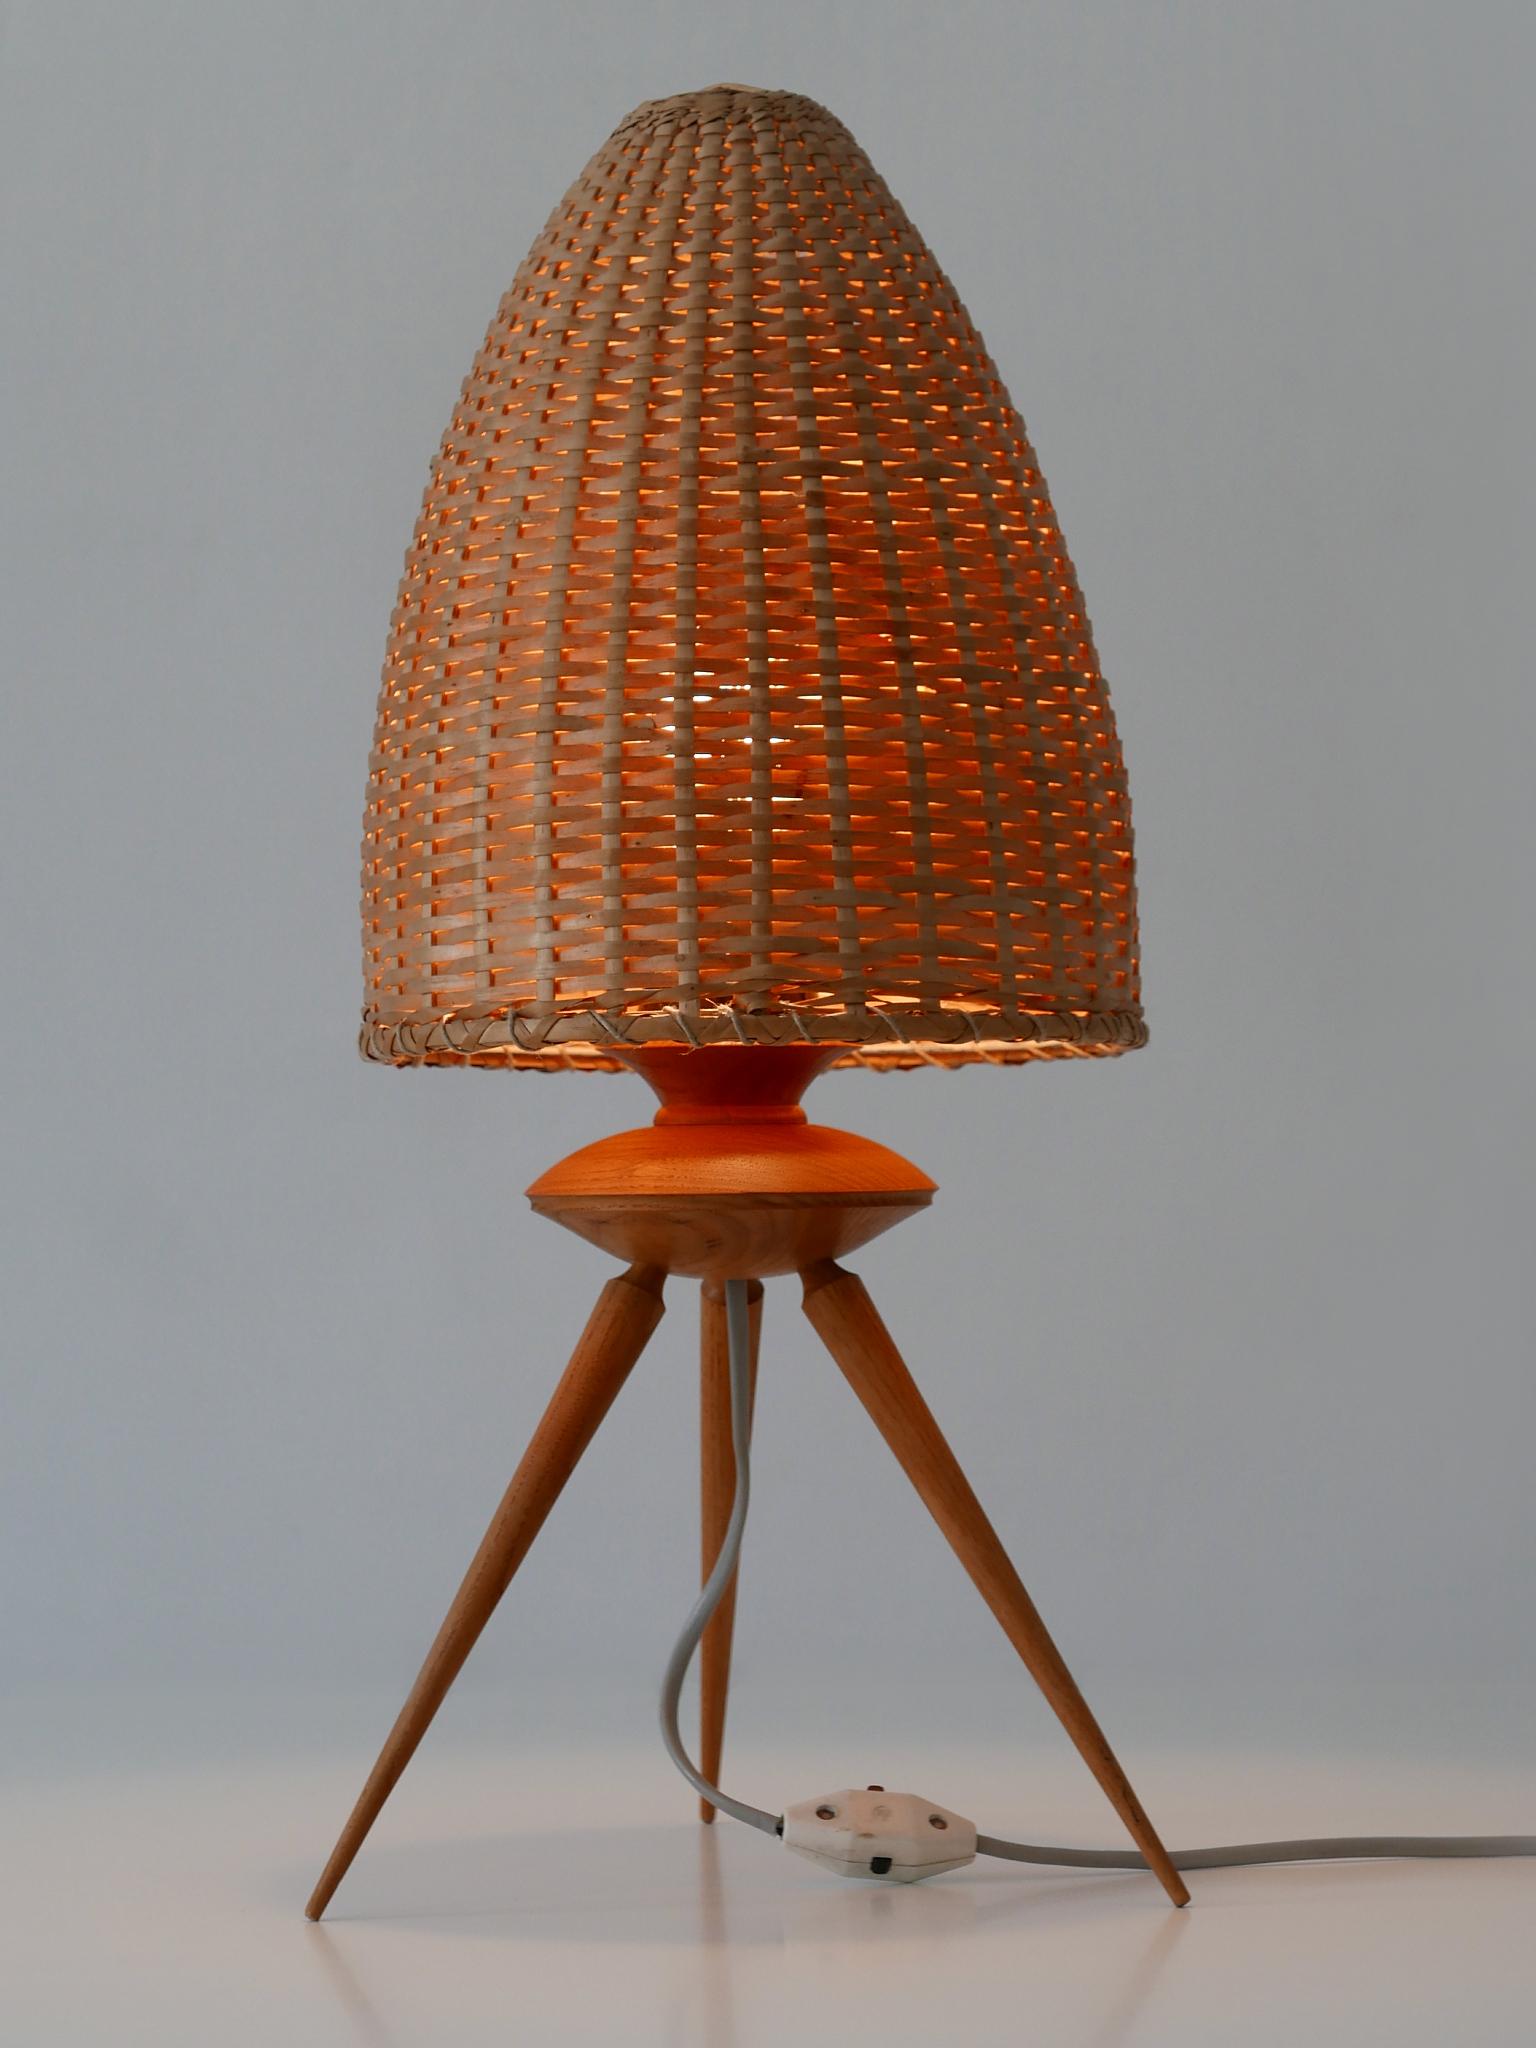 Rare and decorative Mid-Century Modern table lamp. Made probably in Scandinavia, 1960s.

Executed in teak and rattan, the table lamp comes with 1 x E27 Edison screw fit bulb holder. It is with original wiring, in working condition and run both on